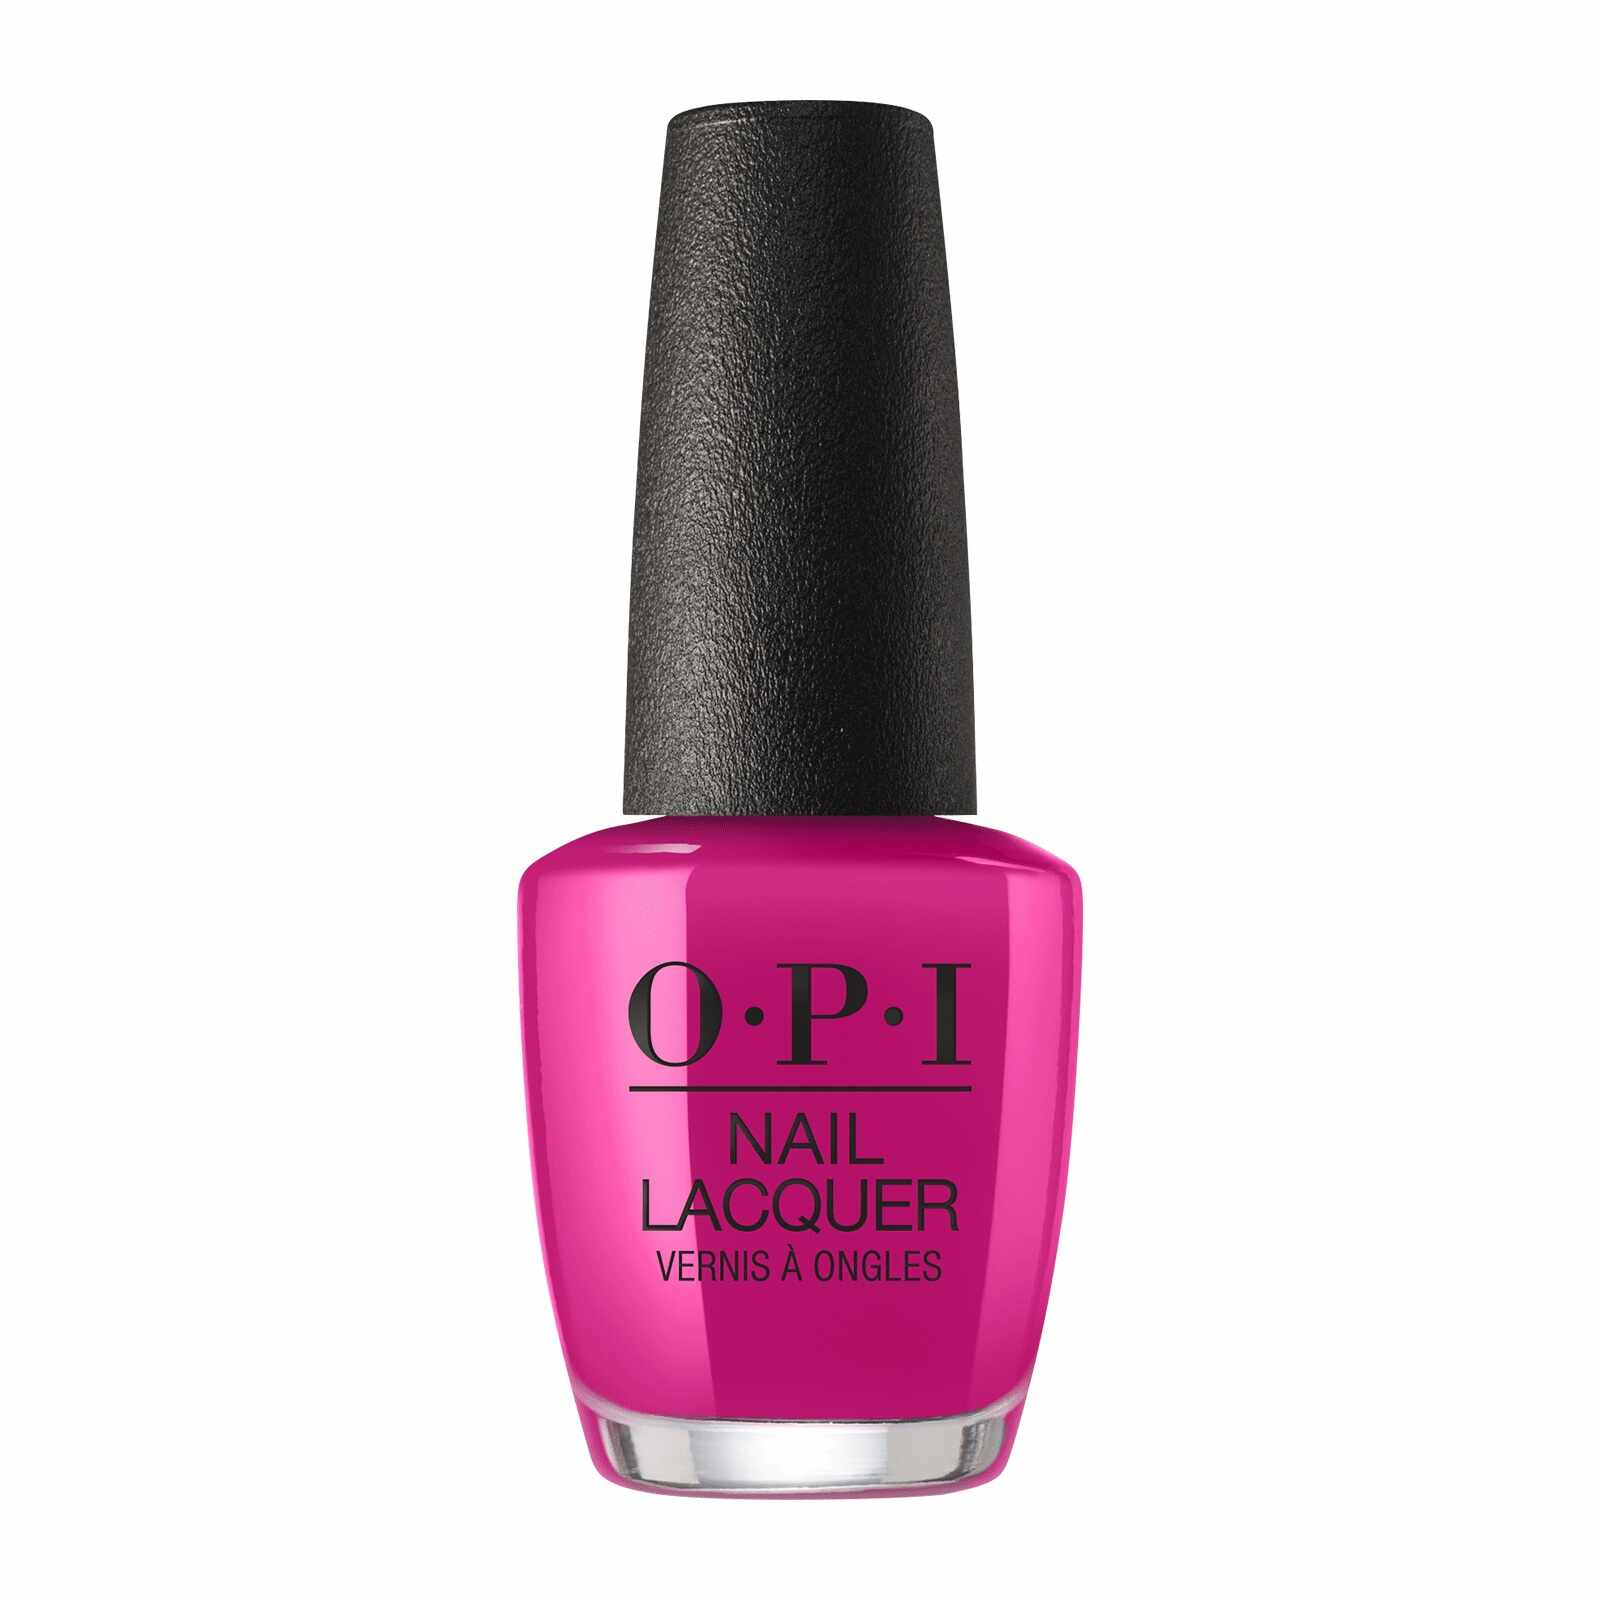 Lac de unghii OPI Nail Lacquer Hurry-Juku Get This Color!, 15ml